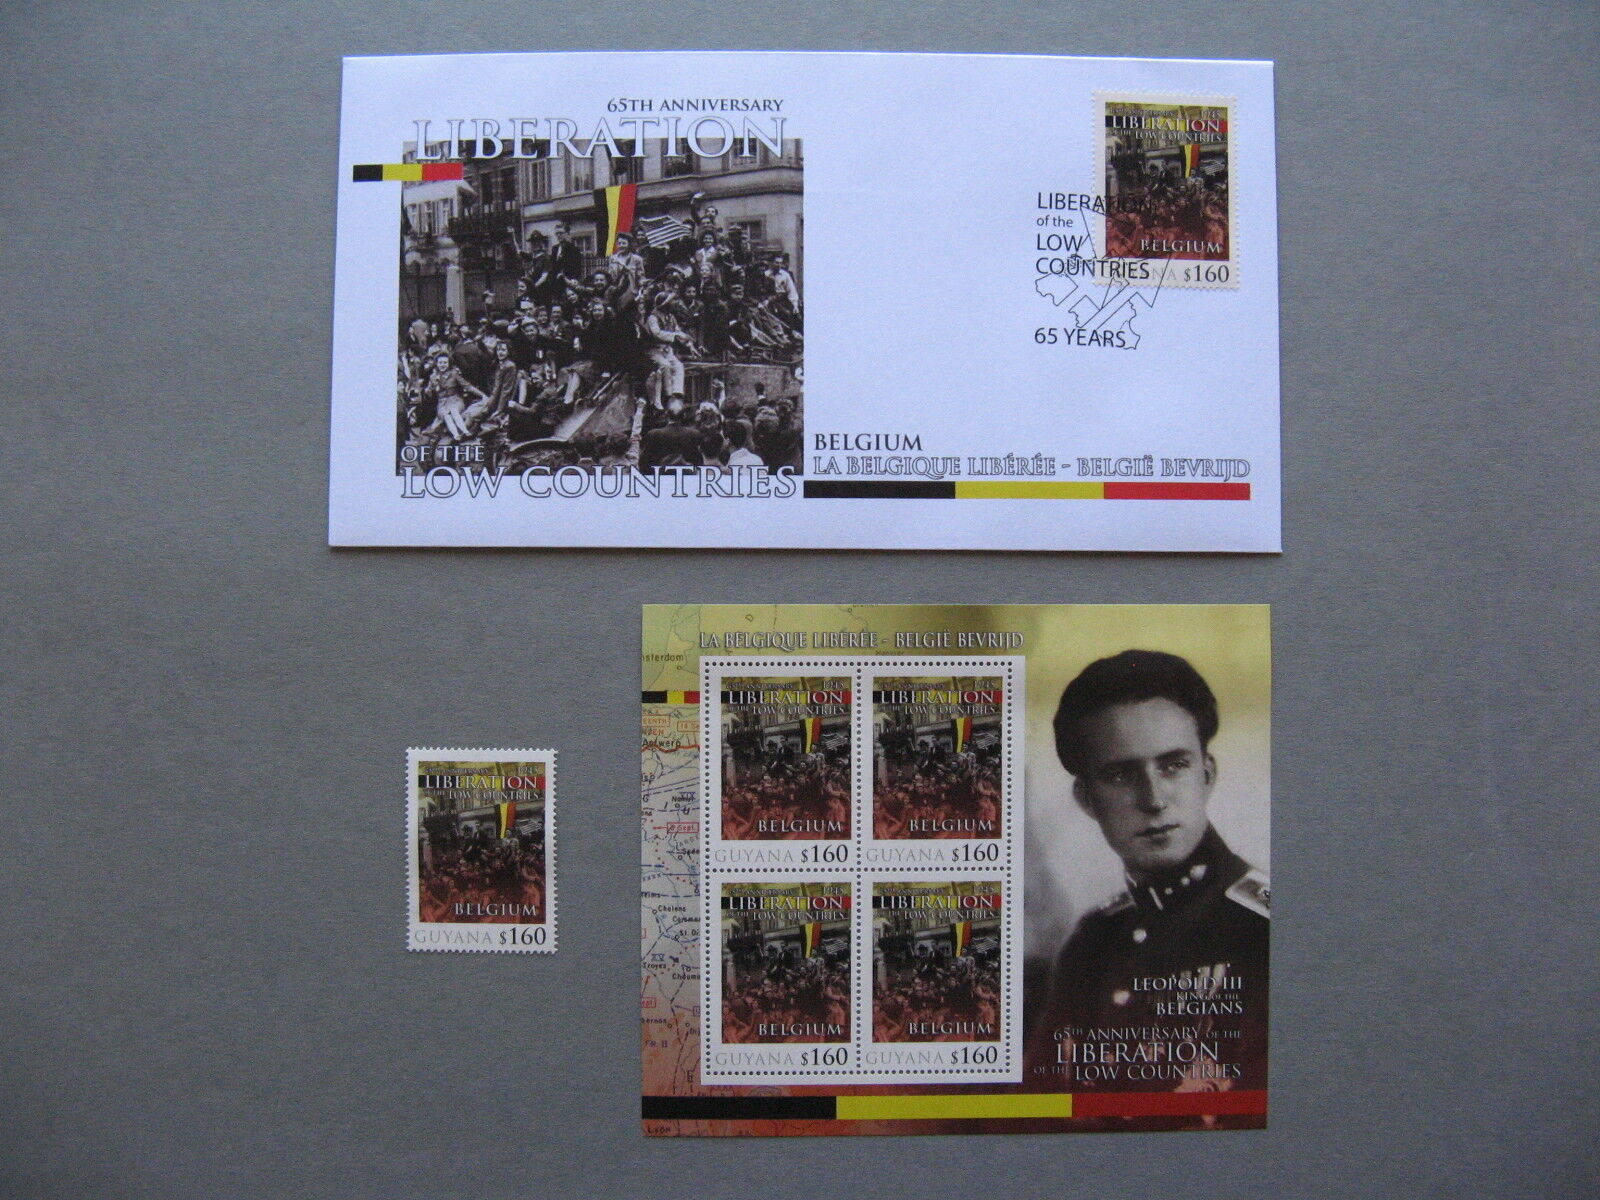 GUYANA, stamp S/S 2010 MNH cover, Personal stamps, Liberation of Belgium, WW-II